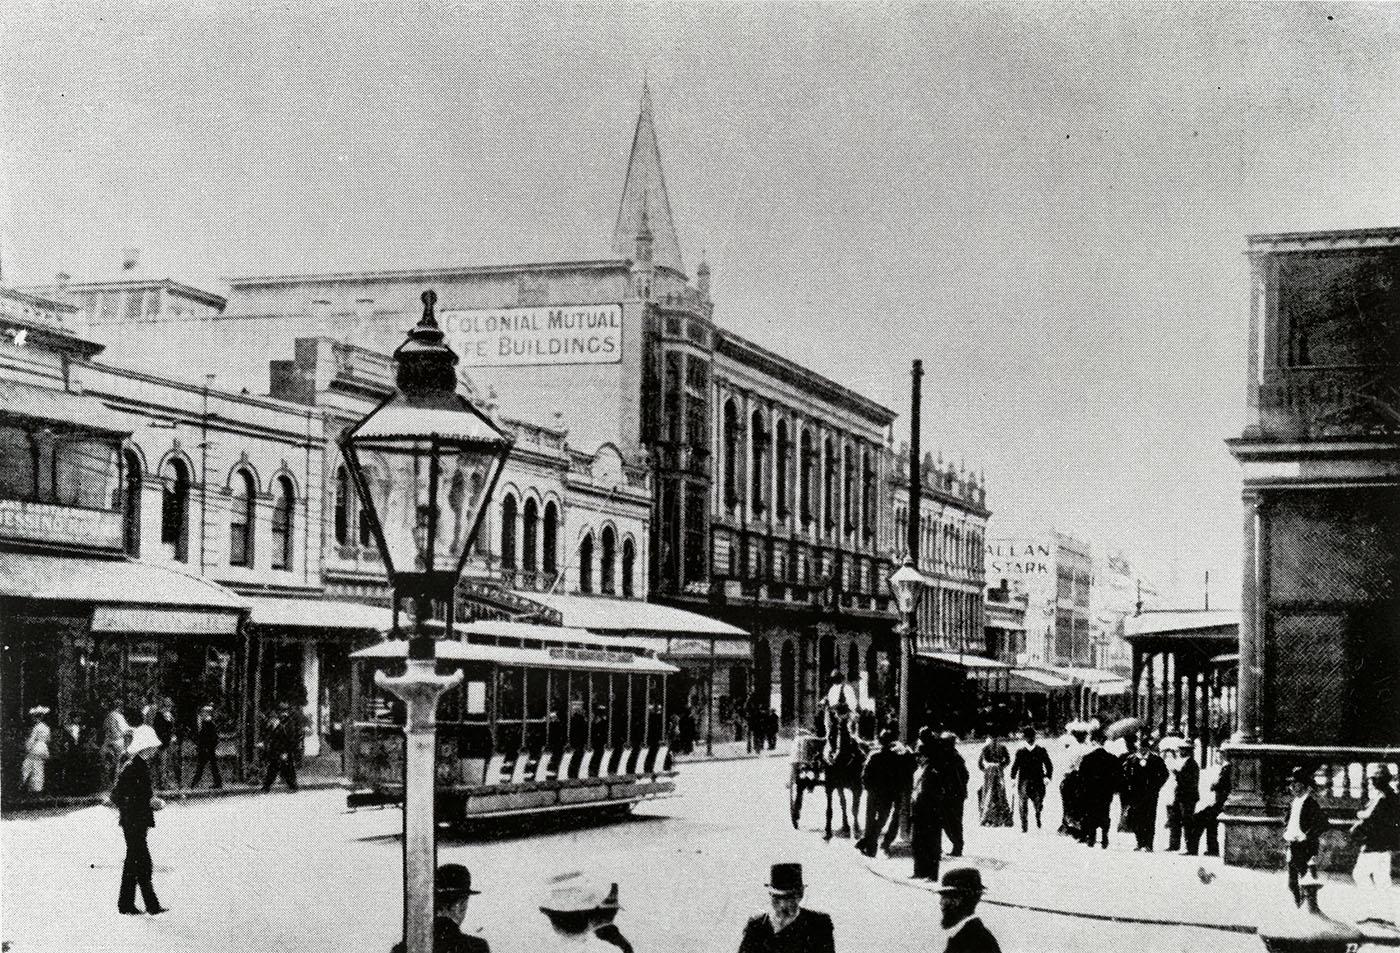 The corner of Queen and Goerge Streets showing many people out walking the streets in period dress